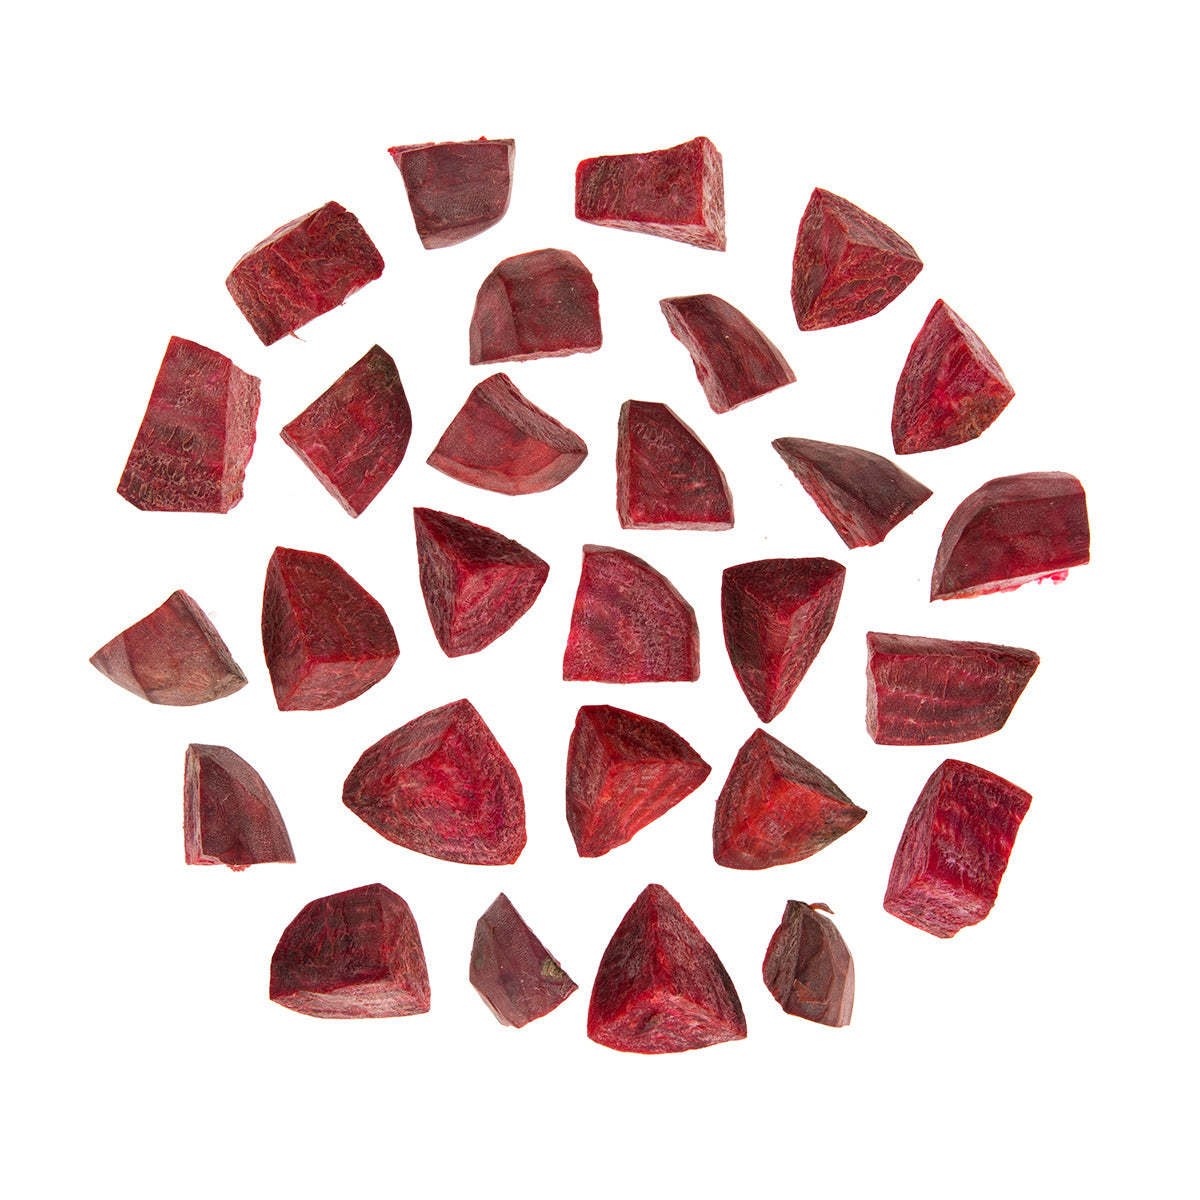 BoxNCase Cubed Red Beets 5 LB